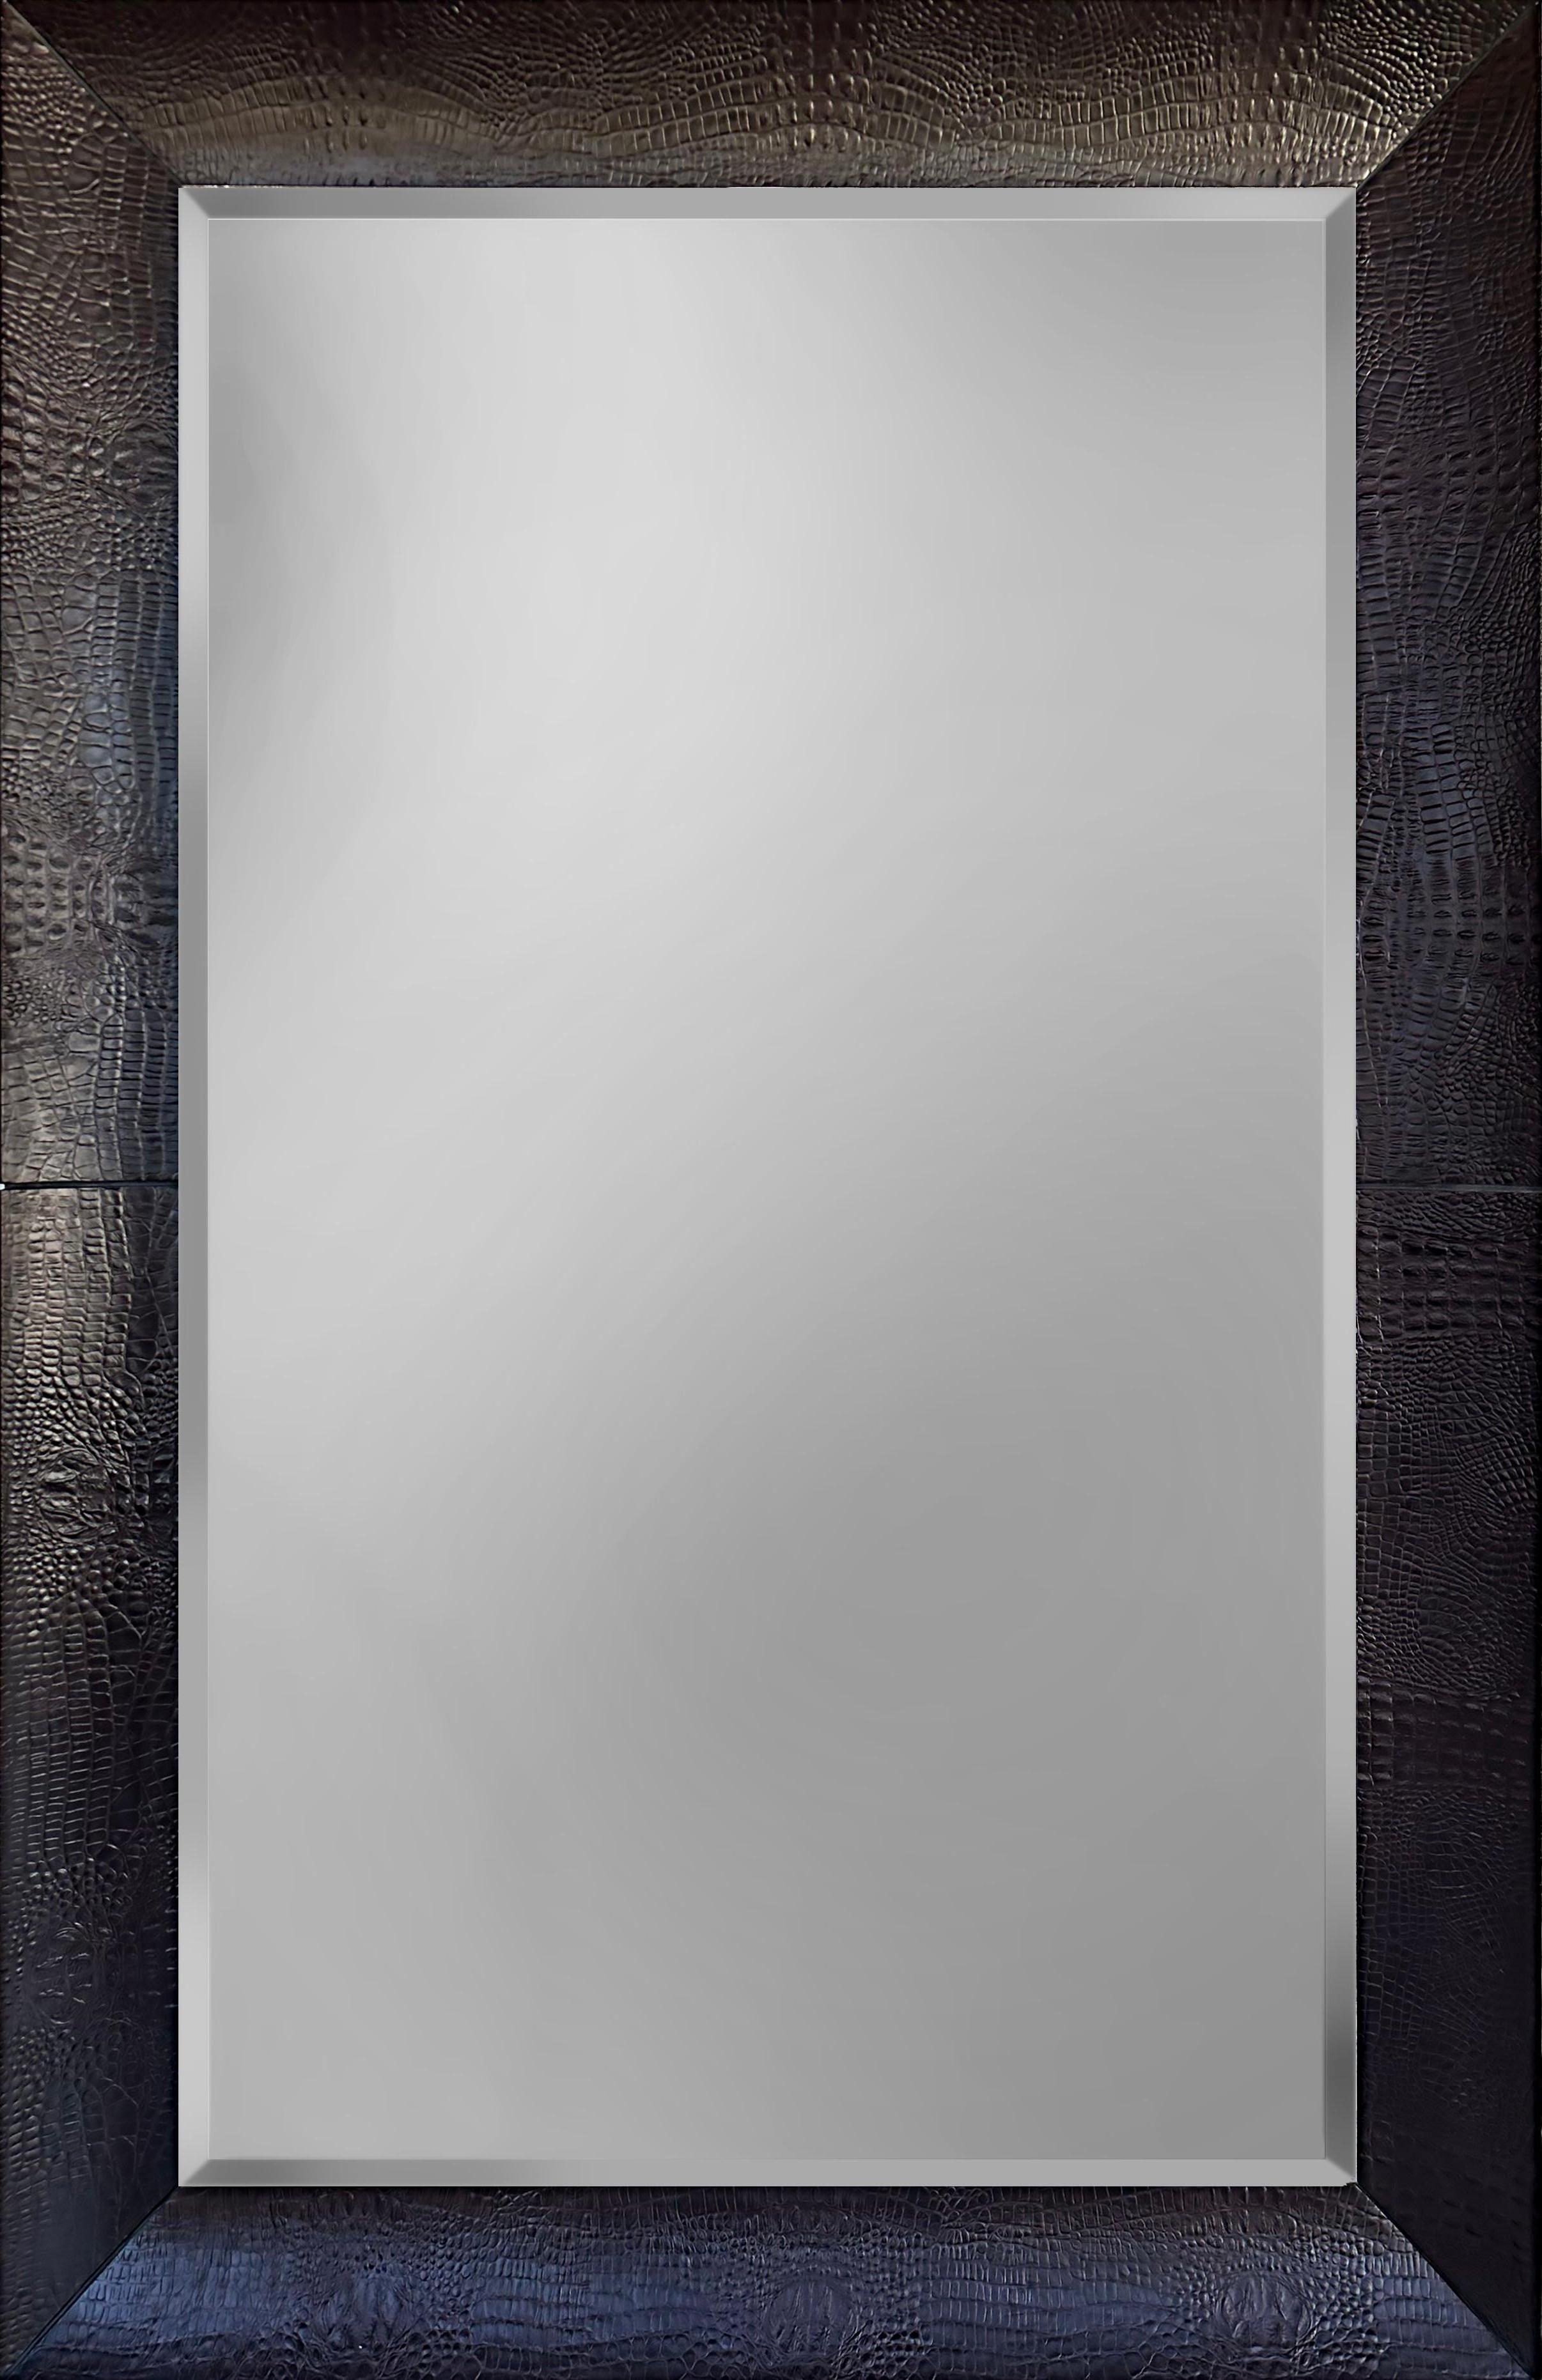 Artefacto Overscale Crocodile Embossed Leather Mirror, Beveled

Offered for sale is an Artefacto (Brazil) over-sized crocodile embossed leather beveled framed mirror.  This elegant mirror can be used wall-hung or standing directly on the floor. It